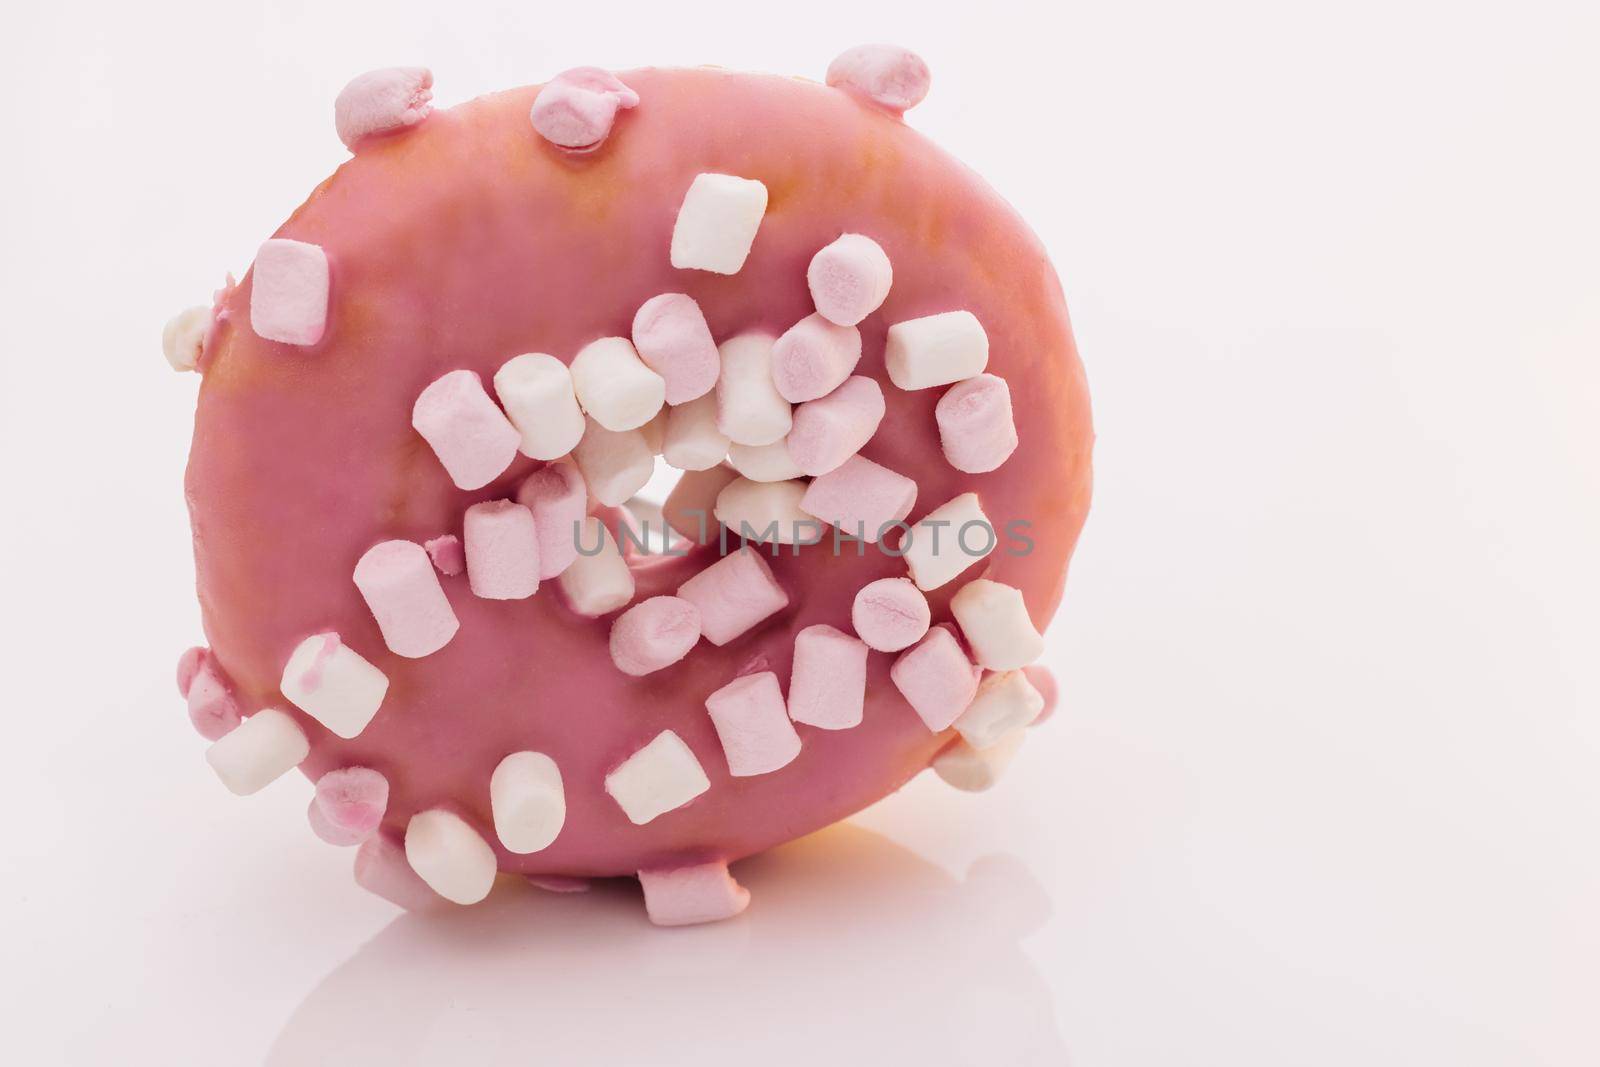 Pink glazed marshmallow donut. Bright and colorful sprinkled donut on a white background. Assortment of donuts of different flavors.